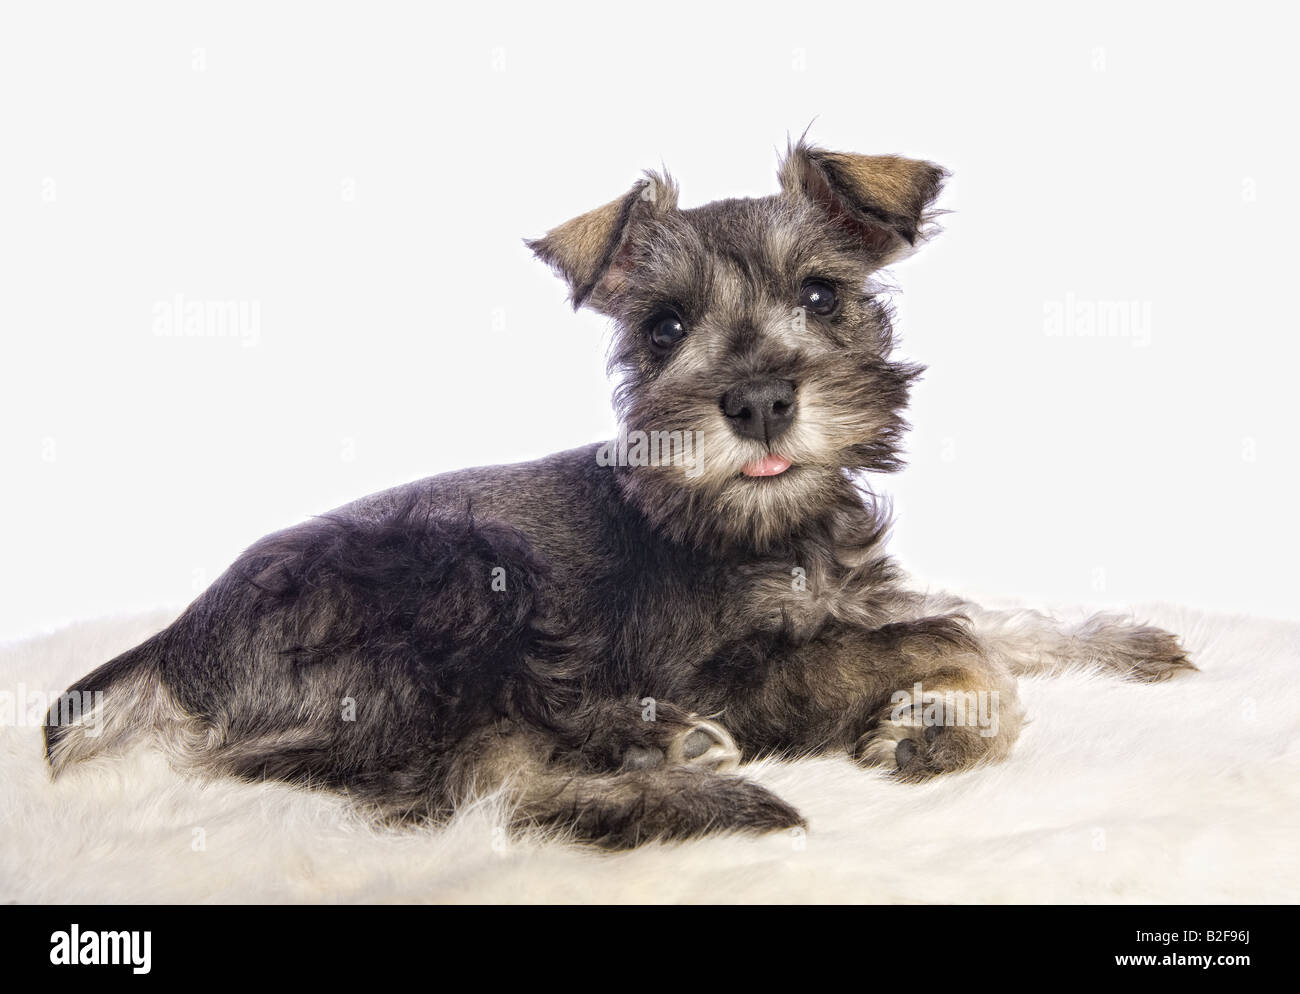 Adorable Miniature Schnauzer puppy lying down isolated on white background Stock Photo